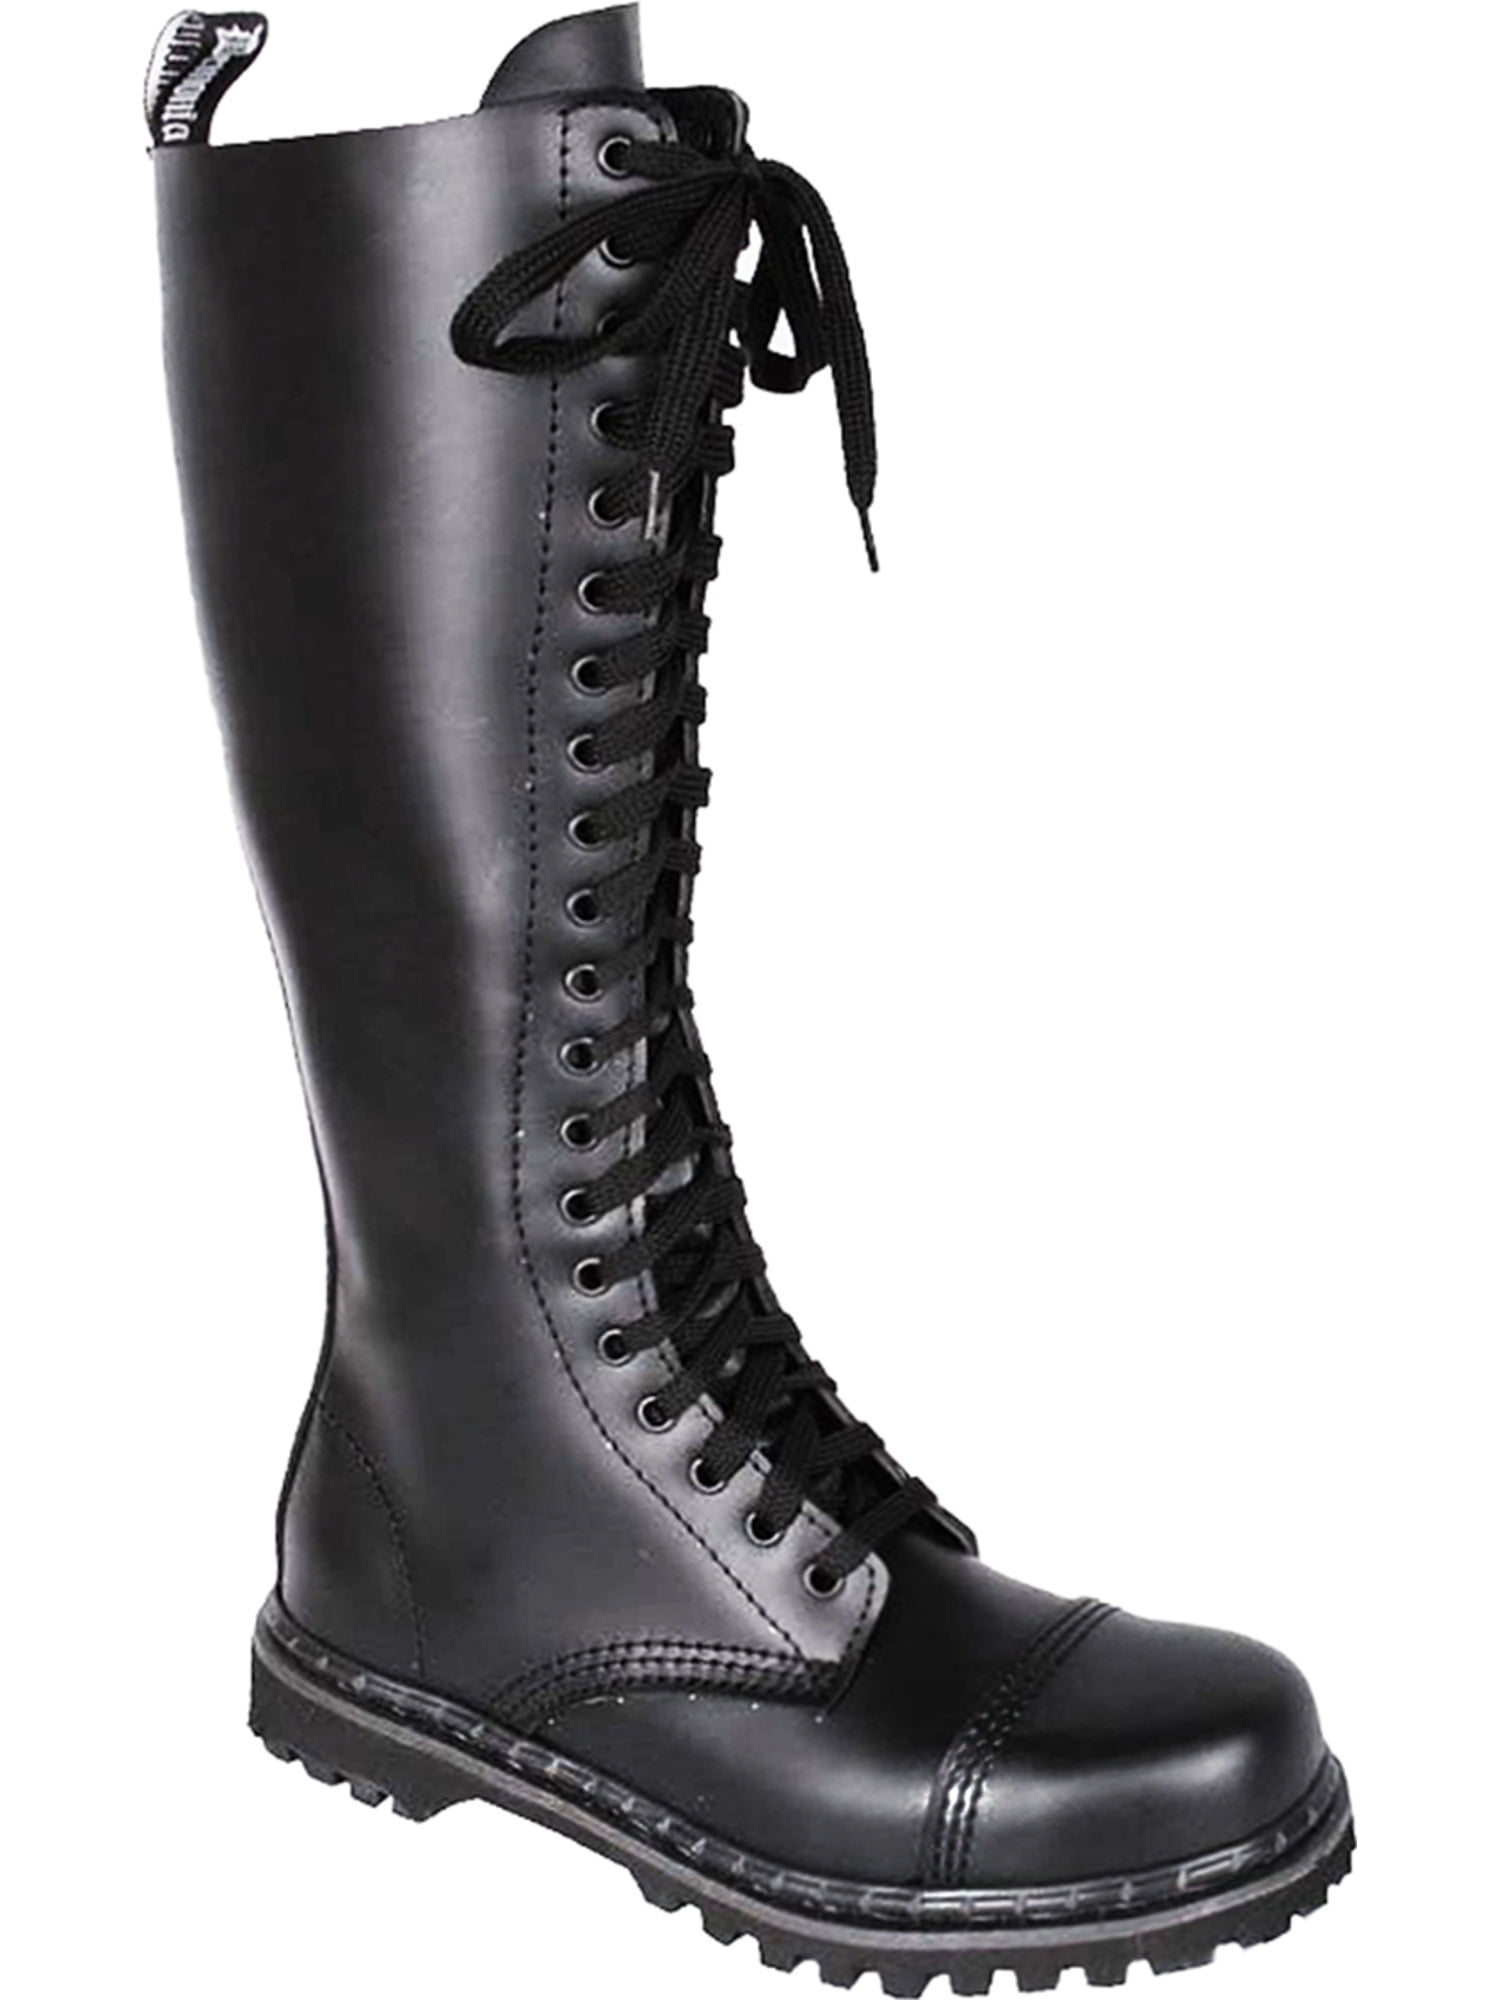 SummitFashions - Mens Gothic Boots Lace Up Knee High Boot Black Leather